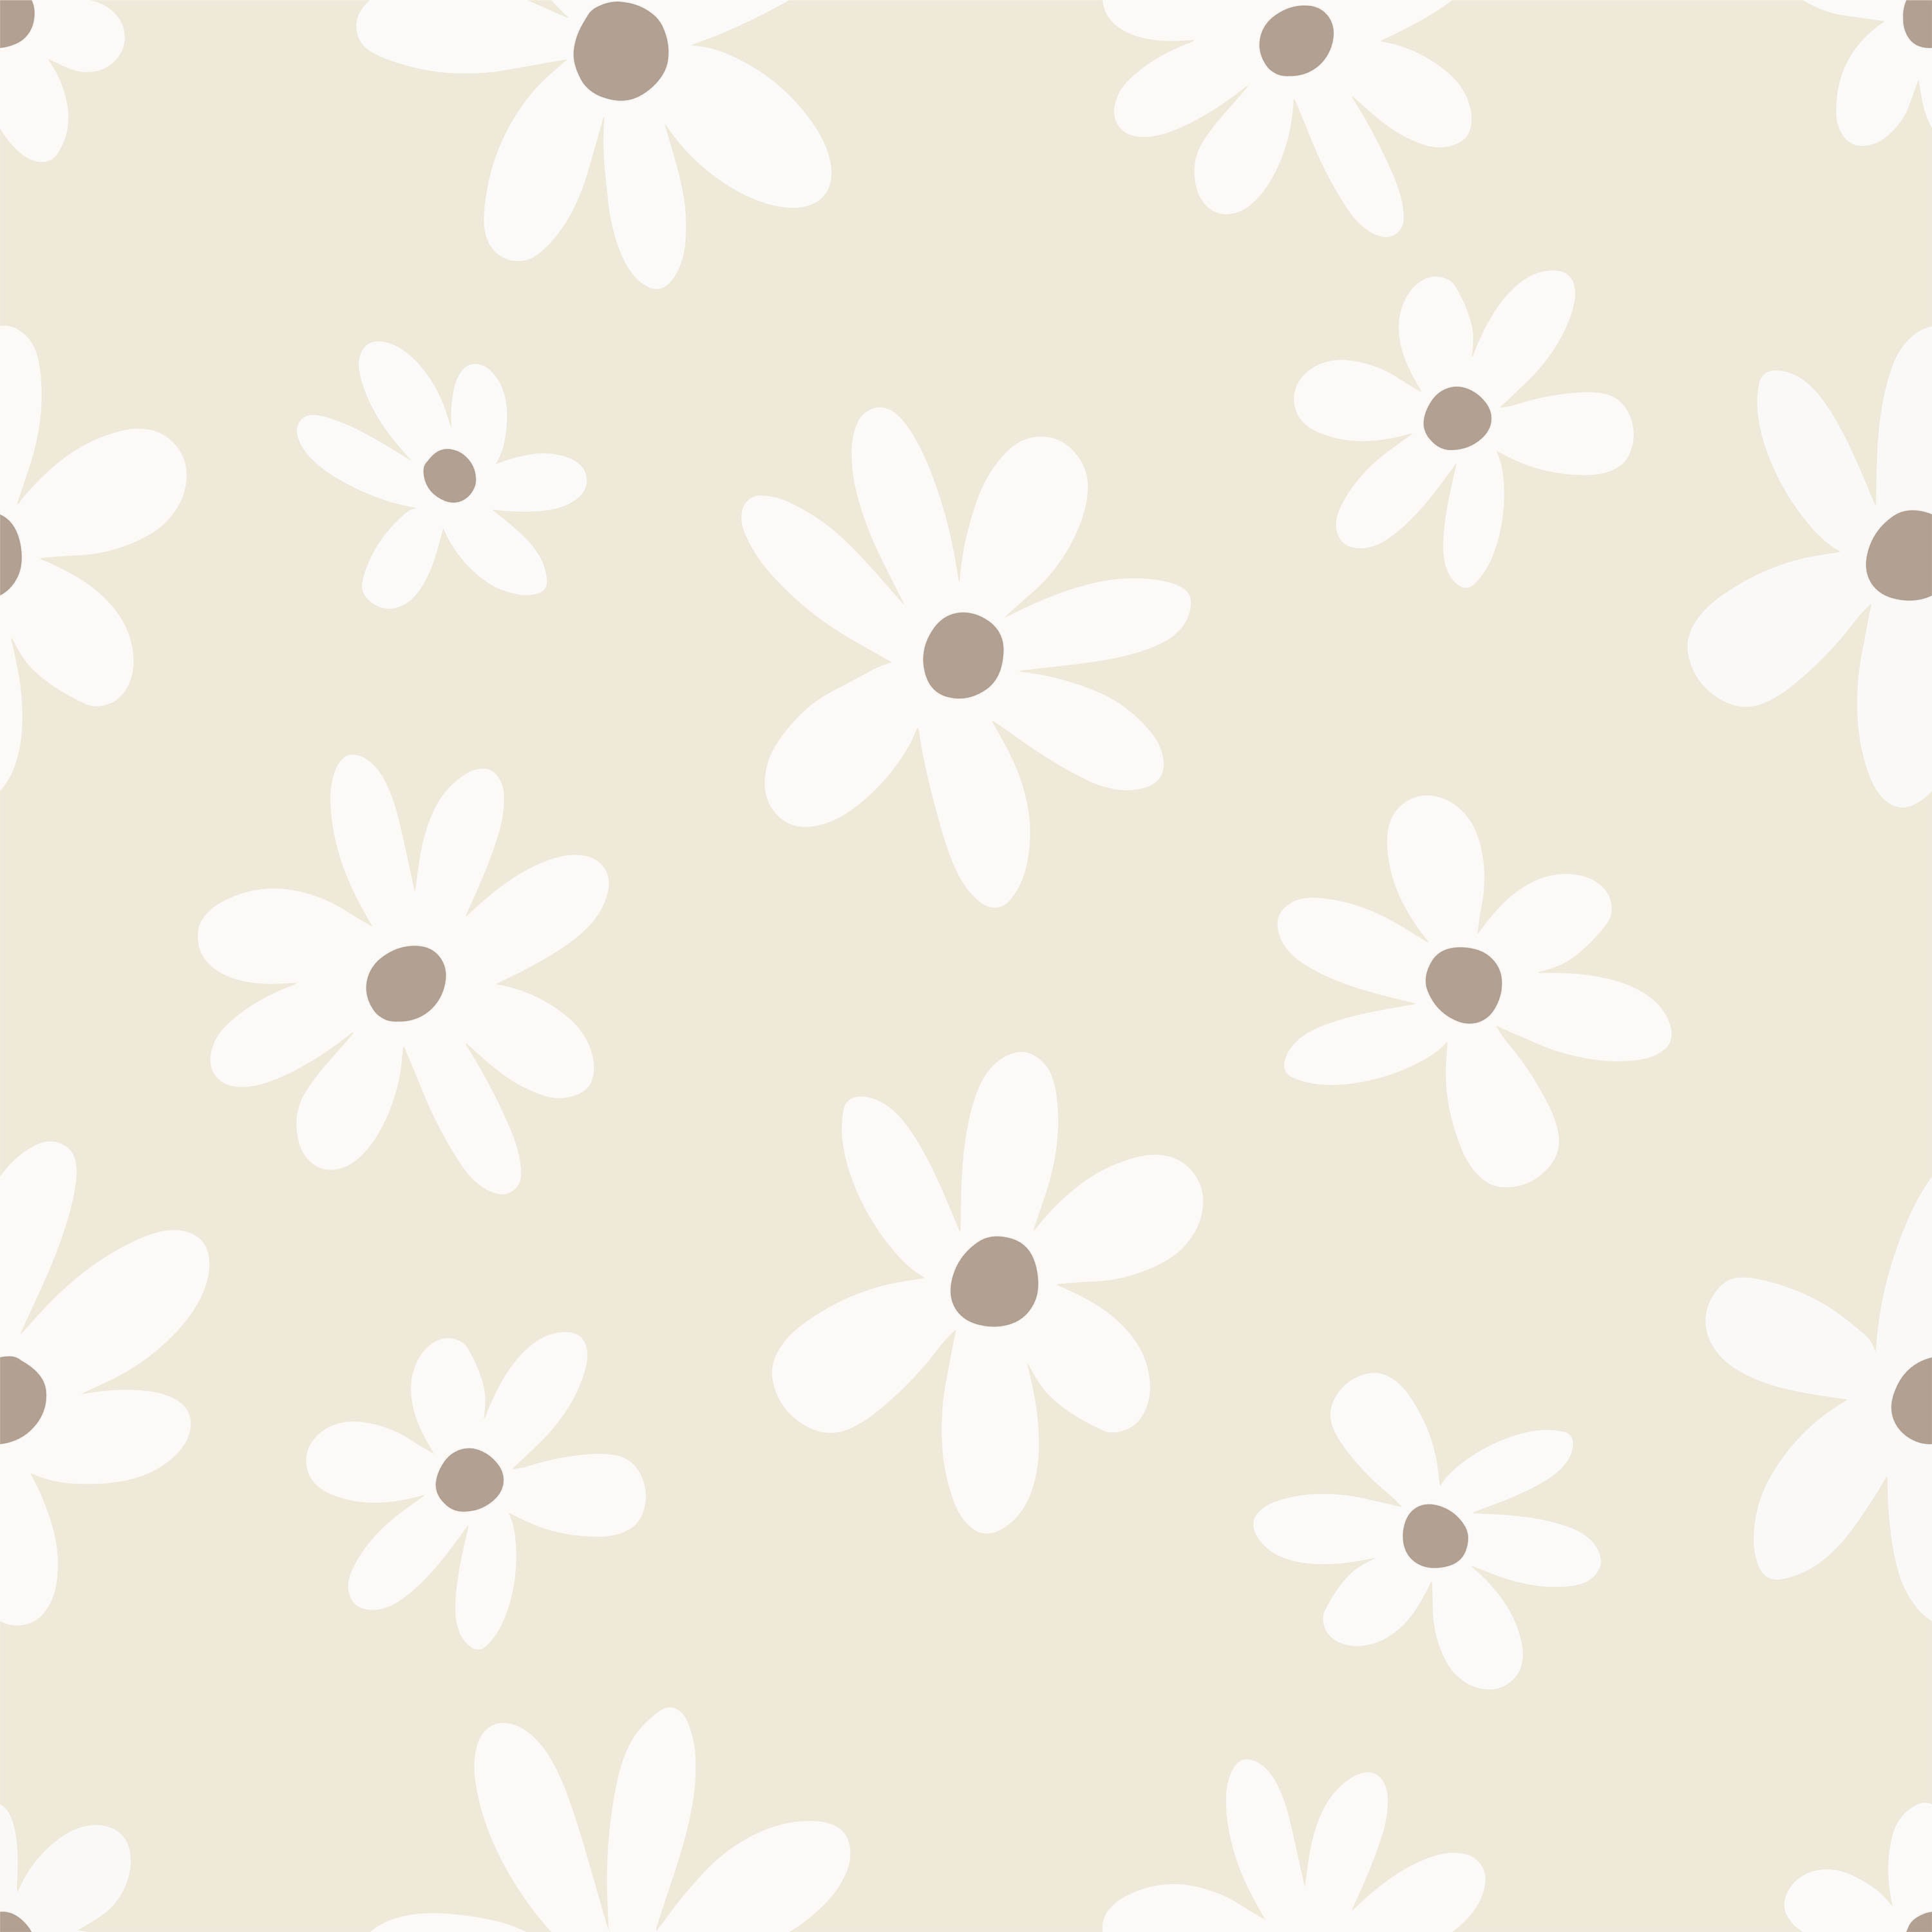 A close-up view of the Simple Daisy Wallpaper in beige, featuring a charming pattern of white daisies with brown centers on a soft beige background. The simple yet elegant design adds a fresh and cheerful touch to any space.